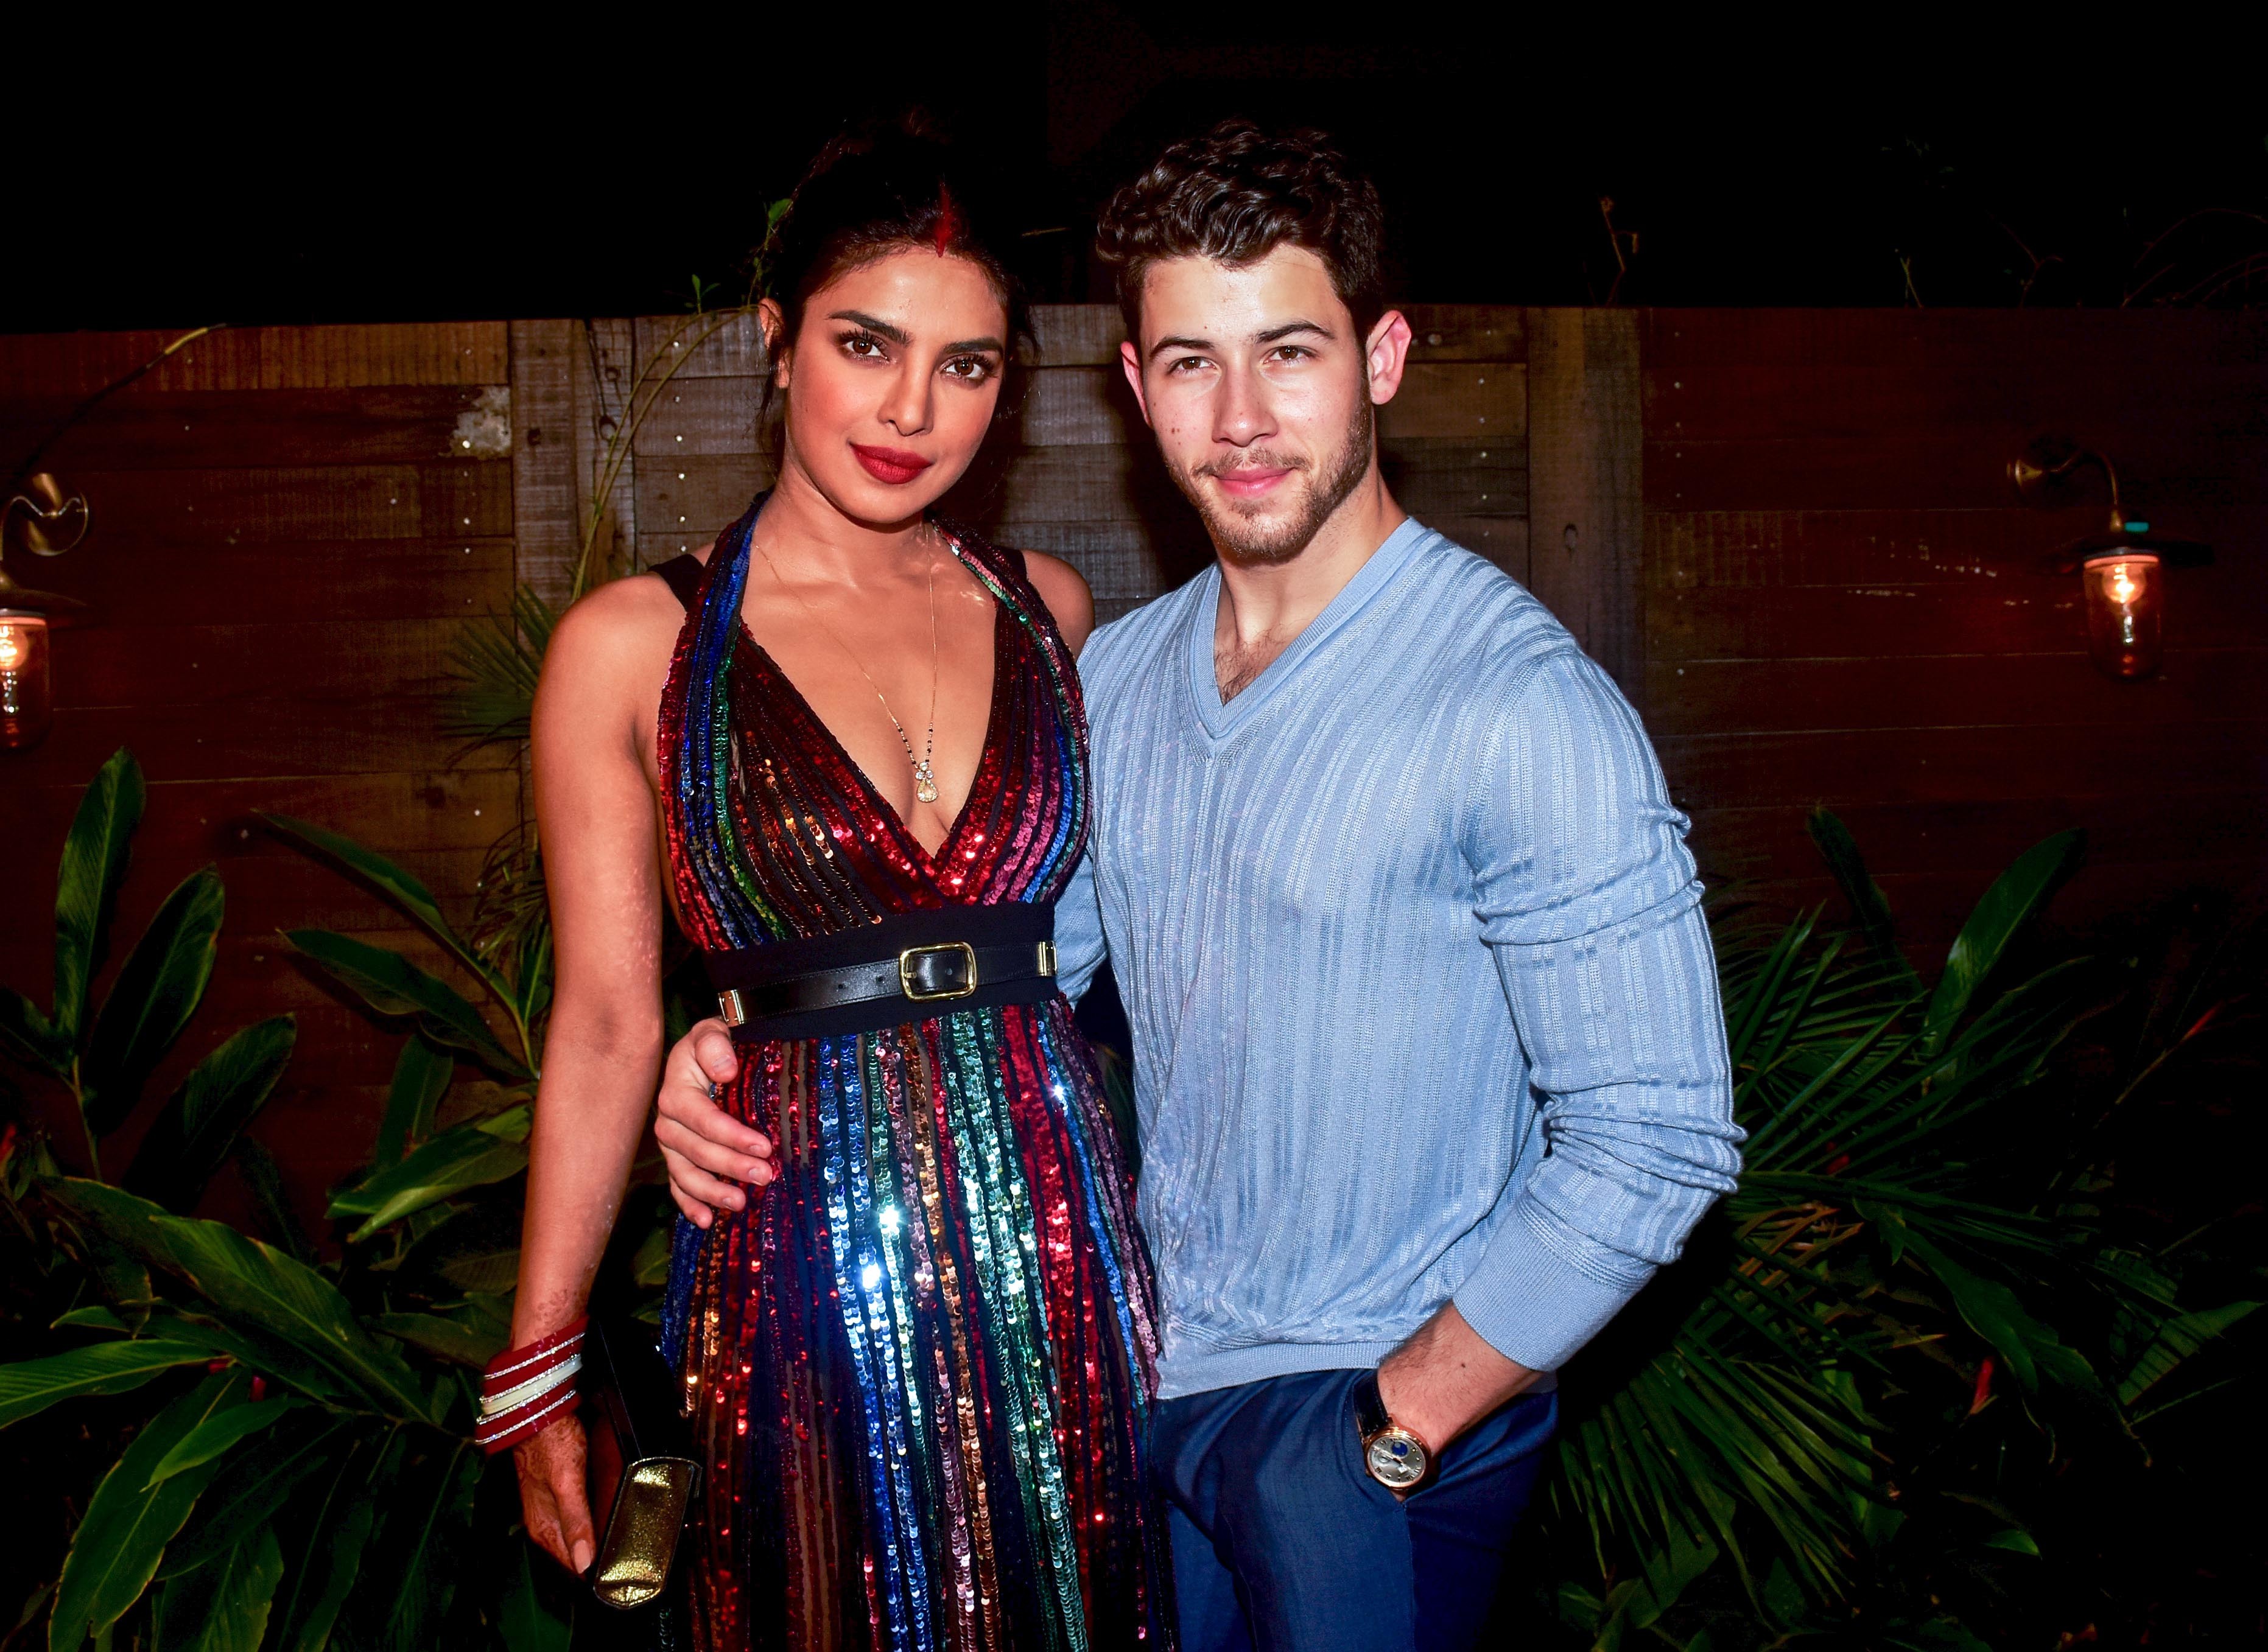 <p><a href="https://www.wonderwall.com/celebrity/profiles/overview/nick-jonas-1229.article">Nick Jonas</a> and Priyanka Chopra got <a href="https://www.wonderwall.com/celebrity/photos/icymi-celeb-news-july-22-july-28-2018-michelle-williams-married-demi-lovato-overdose-nick-jonas-priyanka-chopra-engaged-3015546.gallery?photoId=1028875">engaged</a> in July 2018 after less than two months of dating and <a href="https://www.wonderwall.com/celebrity/couples/nick-jonas-priyanka-chopra-wedding-married-celeb-love-life-news-december-2018-hollywood-romance-report-3017542.gallery">married</a> in December the same year. But the seeds of their romance were sown much earlier. After gushing about Priyanka's beauty and talent to a mutual friend -- her "Quantico" co-star Graham Rogers -- the pop star sent her a DM on Twitter in September 2016. Priyanka hit Nick back and asked him to text her instead. They finally met in person several months later at the 2017 Vanity Fair Oscar Party. More text flirting followed, and they met for a drink a week ahead of the <a href="https://www.wonderwall.com/celebrity/photos/2017-met-gala-celebrity-arrivals-3006111.gallery">2017 Met Gala</a>, where both attended as guests of designer Ralph Lauren... but they were so busy, it still took another year for them to actually go on a proper date. They finally made it happen on May 25, 2018. <a href="https://www.wonderwall.com/news/nick-jonas-marks-first-date-anniversary-wife-priyanka-chopra-gushing-post-mariah-carey-3019753.article">Nick shared details</a> on Instagram a year later. "One year ago today I went to go see Beauty and the Beast at the Hollywood bowl with a group of friends. One of those friends was the woman that would become my best friend, my confidant, my muse, my beautiful wife," he wrote. In January 2022, they became first-time parents when they welcomed a child <a href="https://www.wonderwall.com/celebrity/stars-who-used-surrogates-babies-families-443655.gallery">via surrogate</a>.</p>